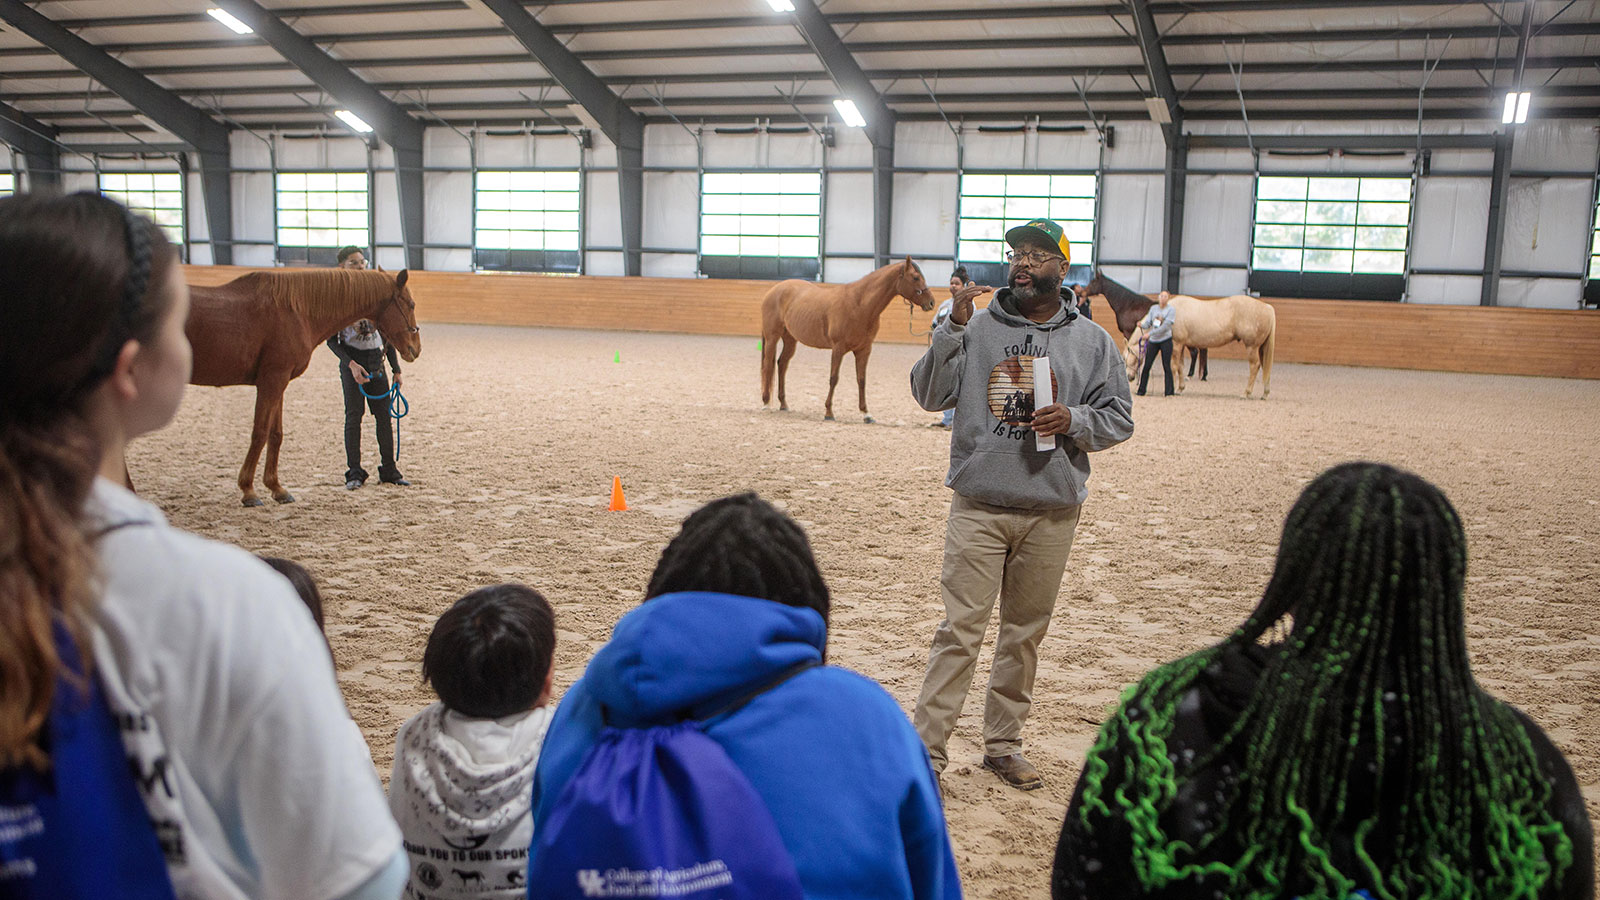 Jermo Reese, founder and clinician of Frankie's Corner Little Thoroughbred Crusade, instructing the students.